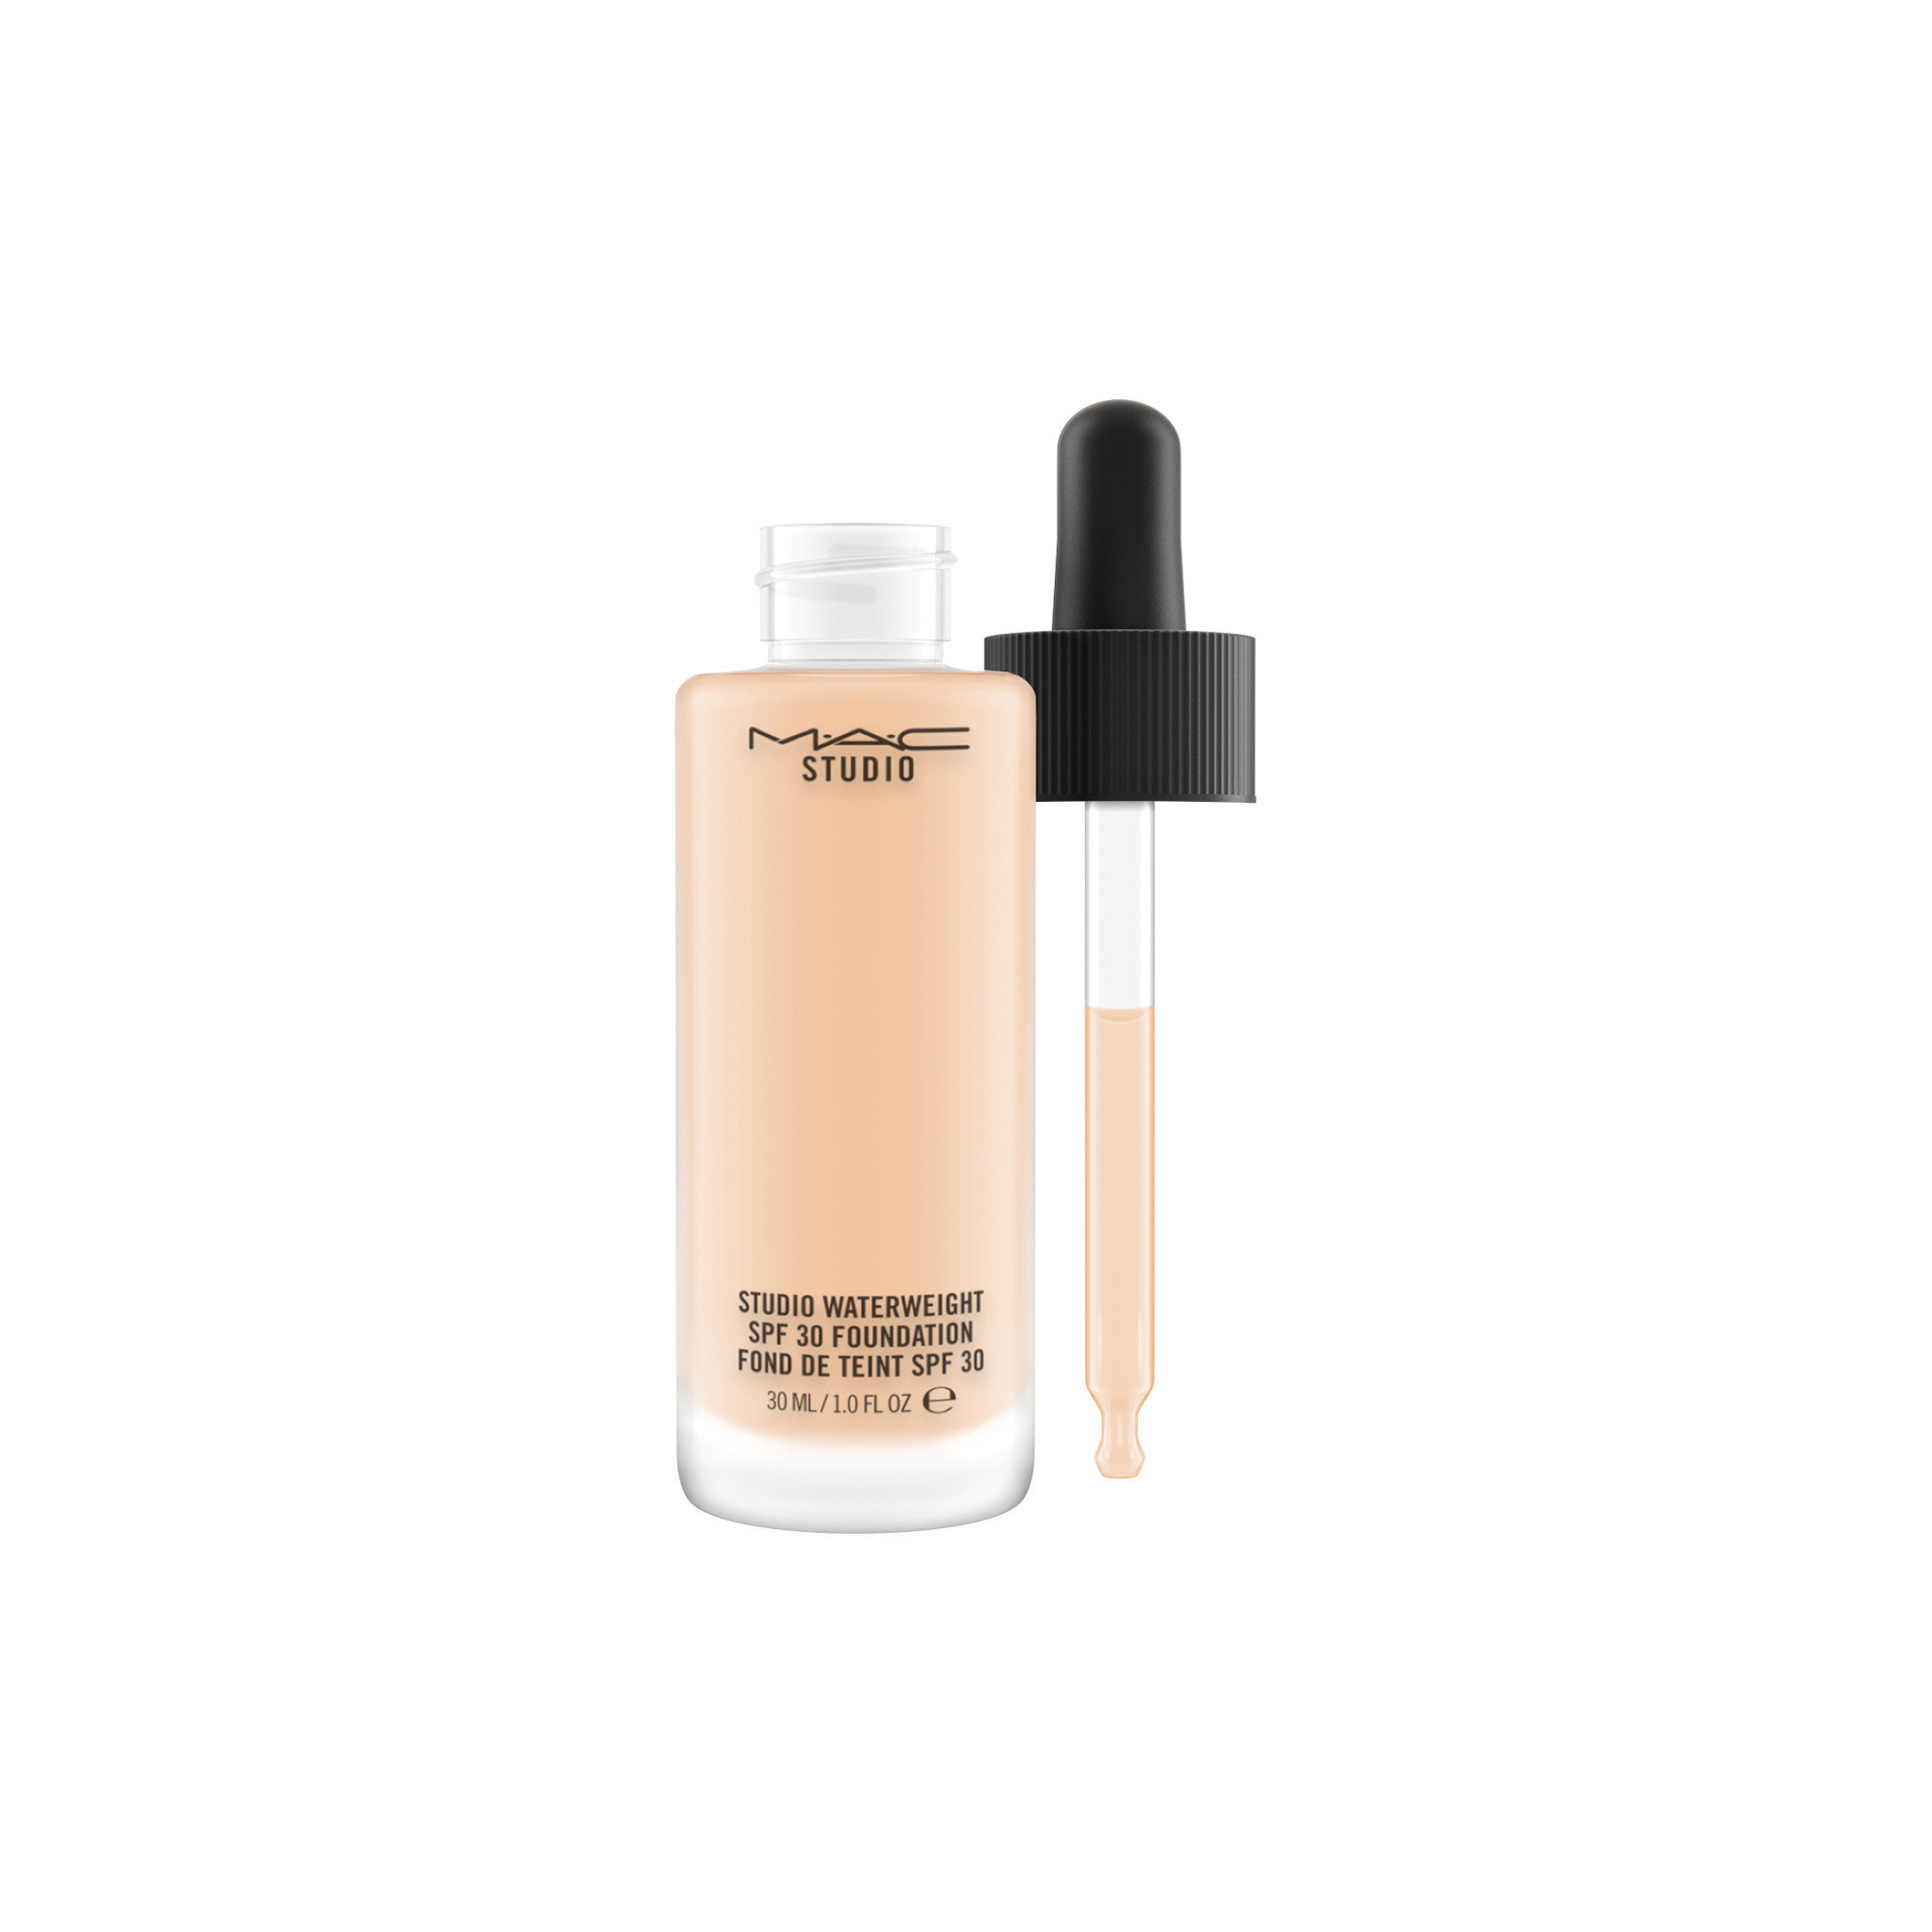 Studio Waterweight Foundation Spf30 - NC20, NC20, large image number 1